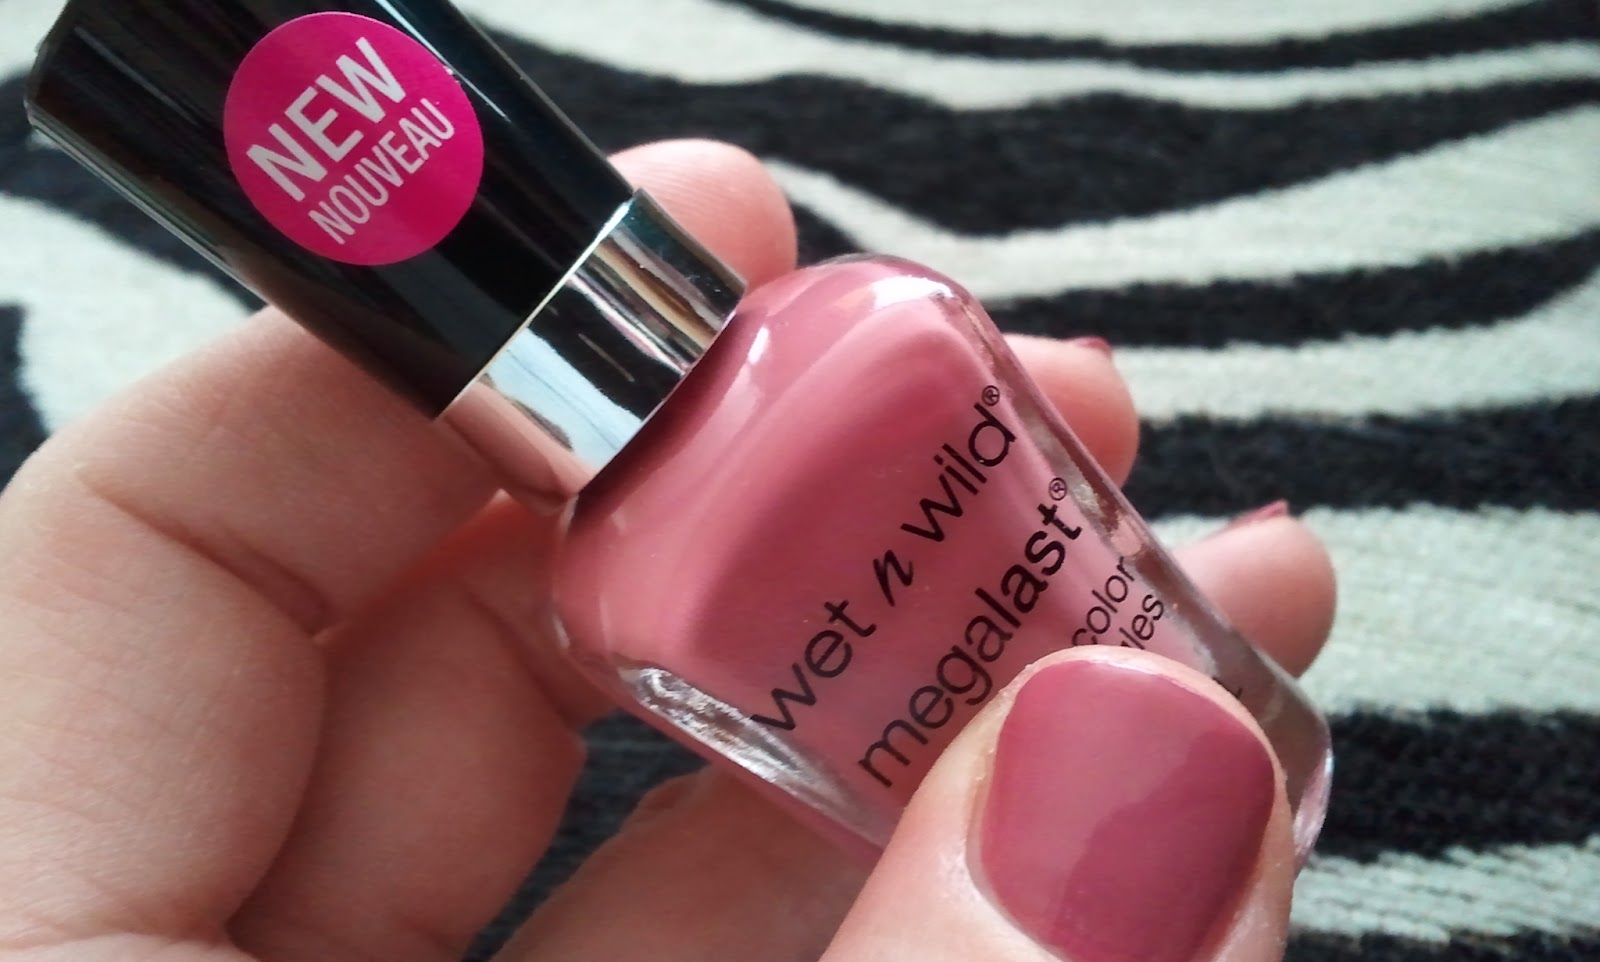 3. Wet n Wild Fast Dry Nail Color in "Undercover" - wide 6